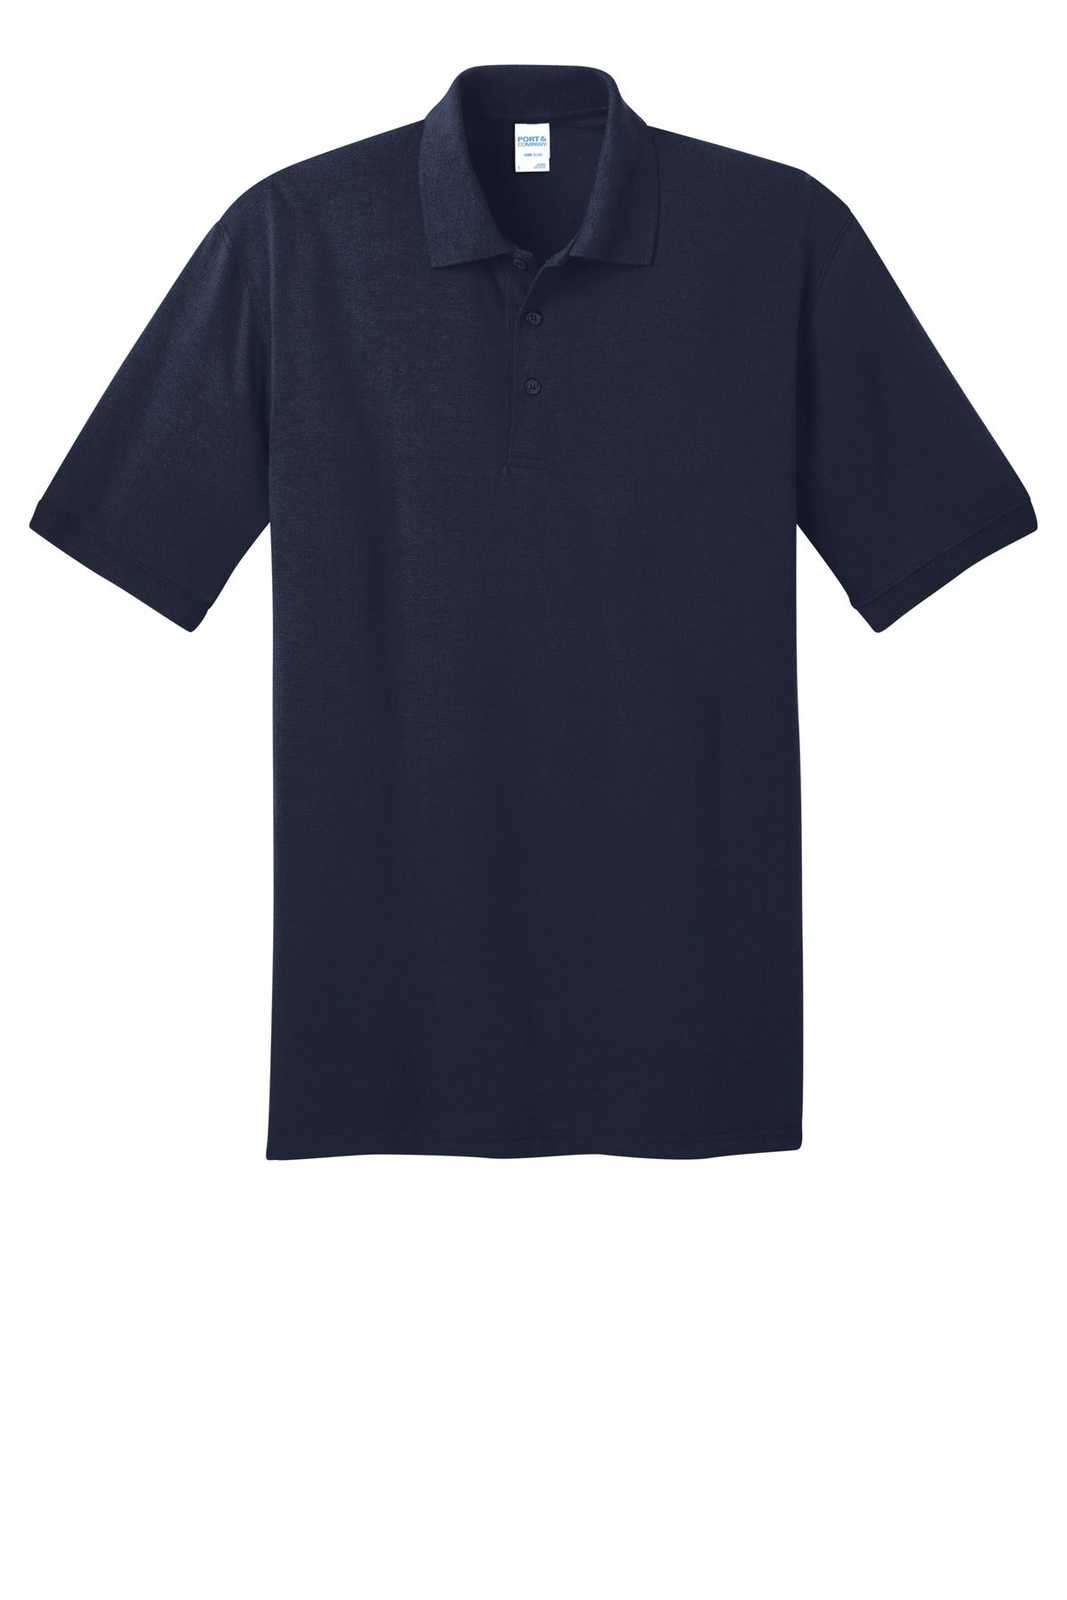 Port & Company KP55T Tall Core Blend Jersey Knit Polo - Deep Navy - HIT a Double - 1